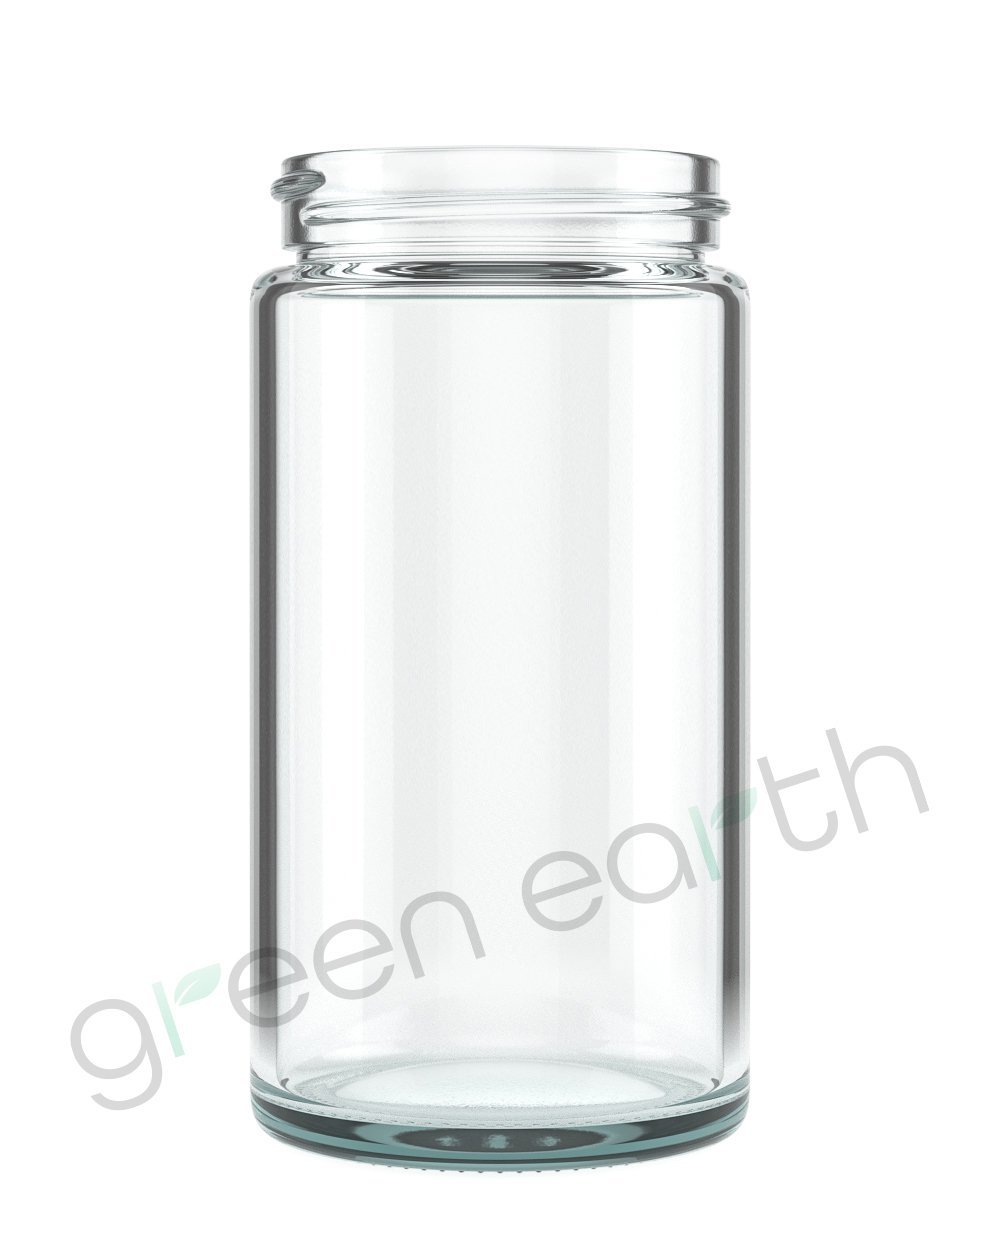 6 oz Clear Straight Sided Glass Jar with Black Metal Lid